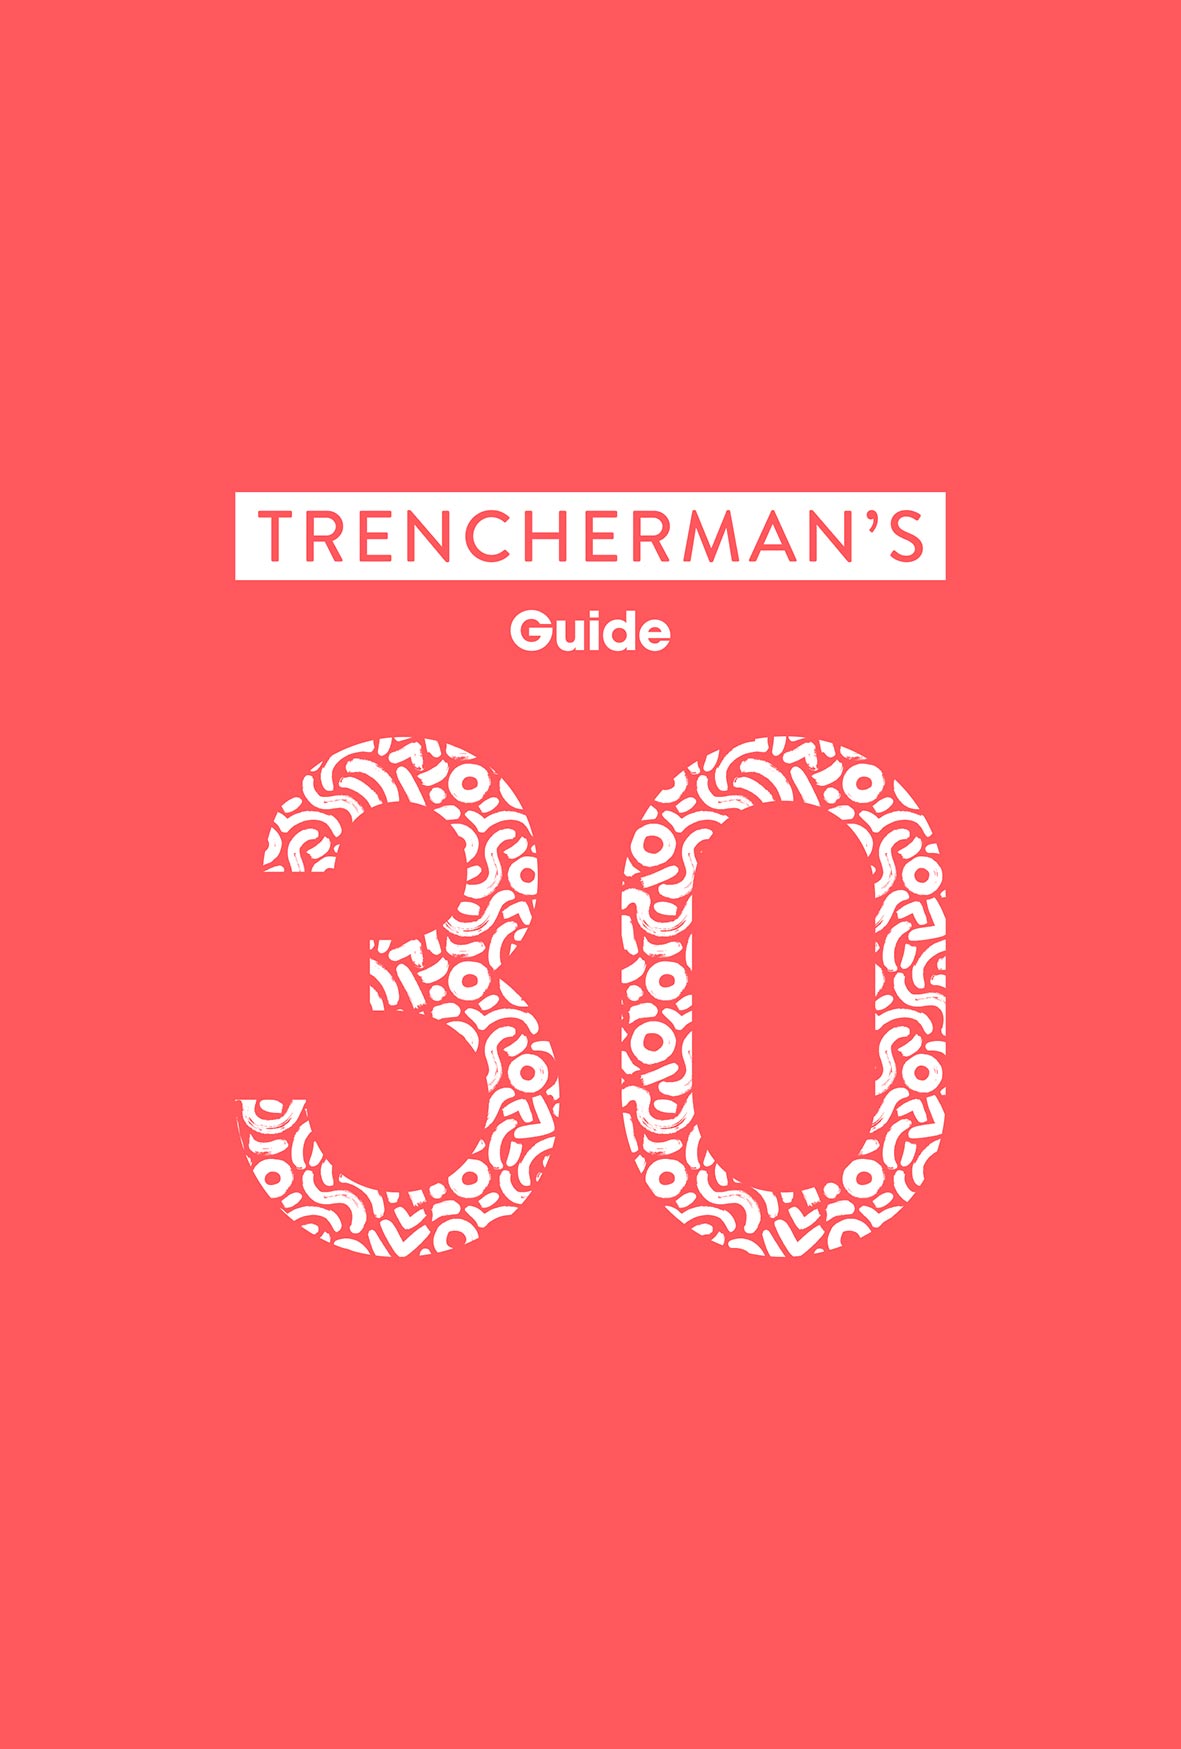 Trencherman's Guide at 30